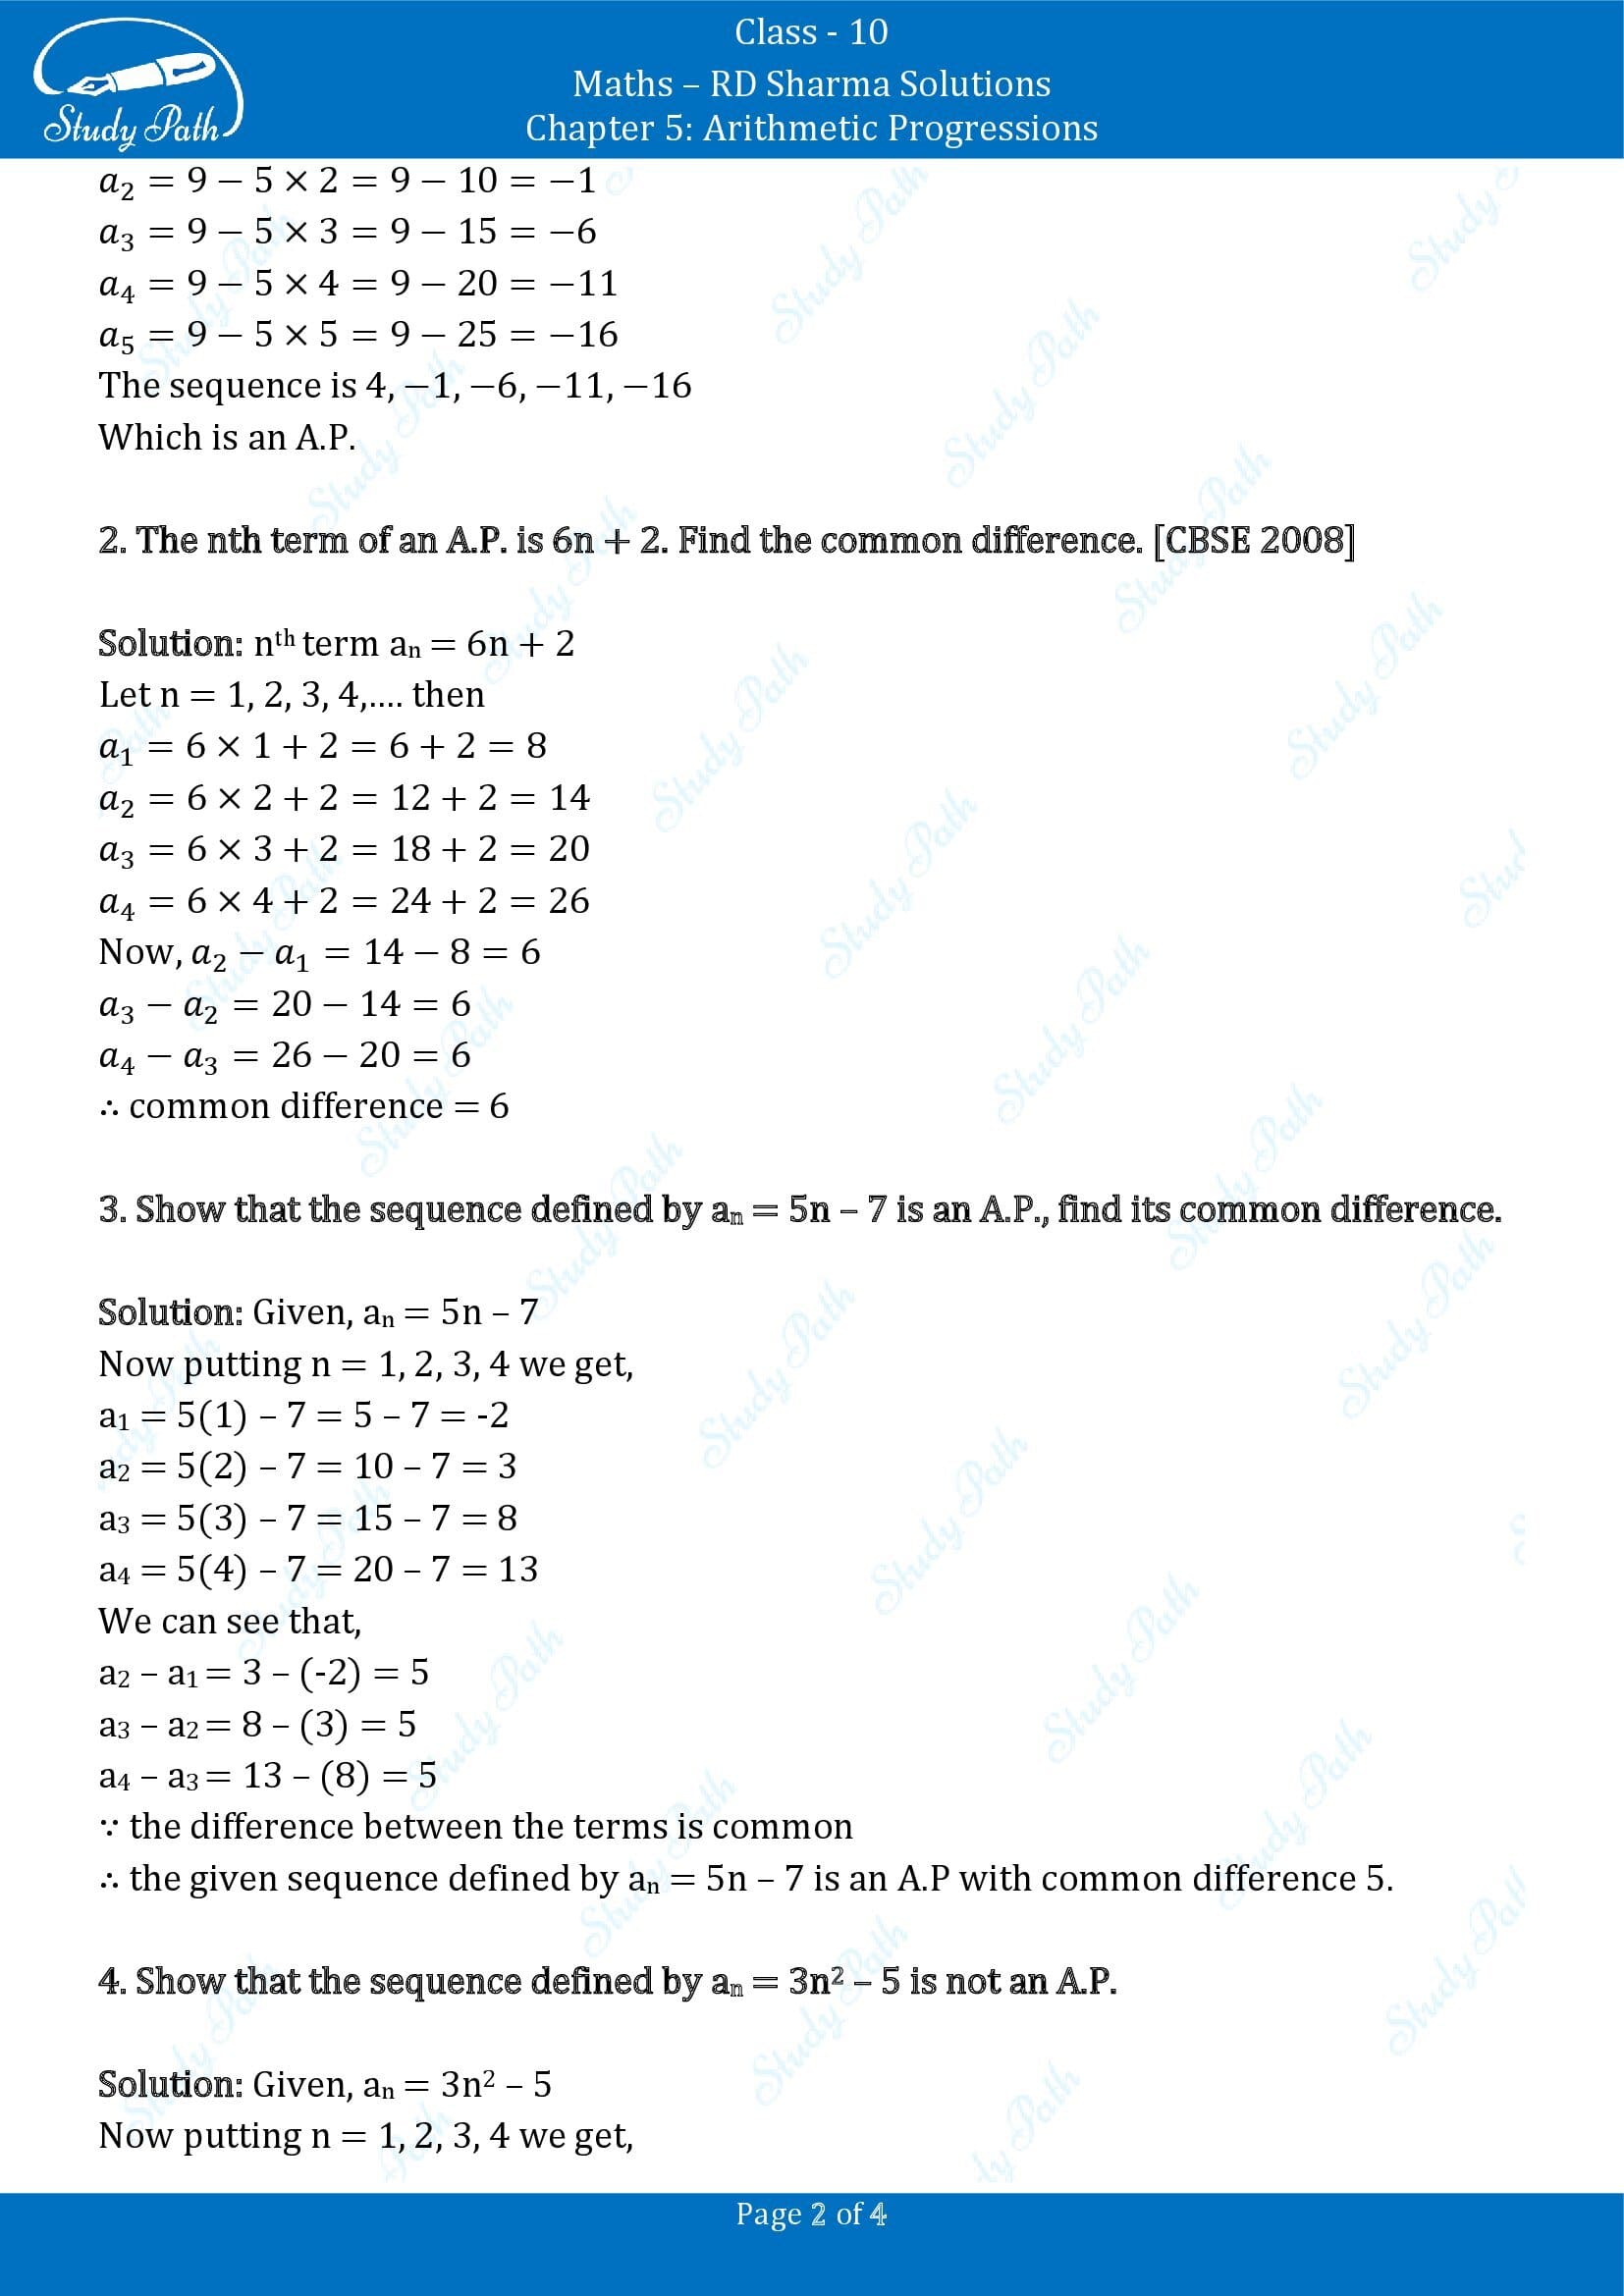 RD Sharma Solutions Class 10 Chapter 5 Arithmetic Progressions Exercise 5.2 00002